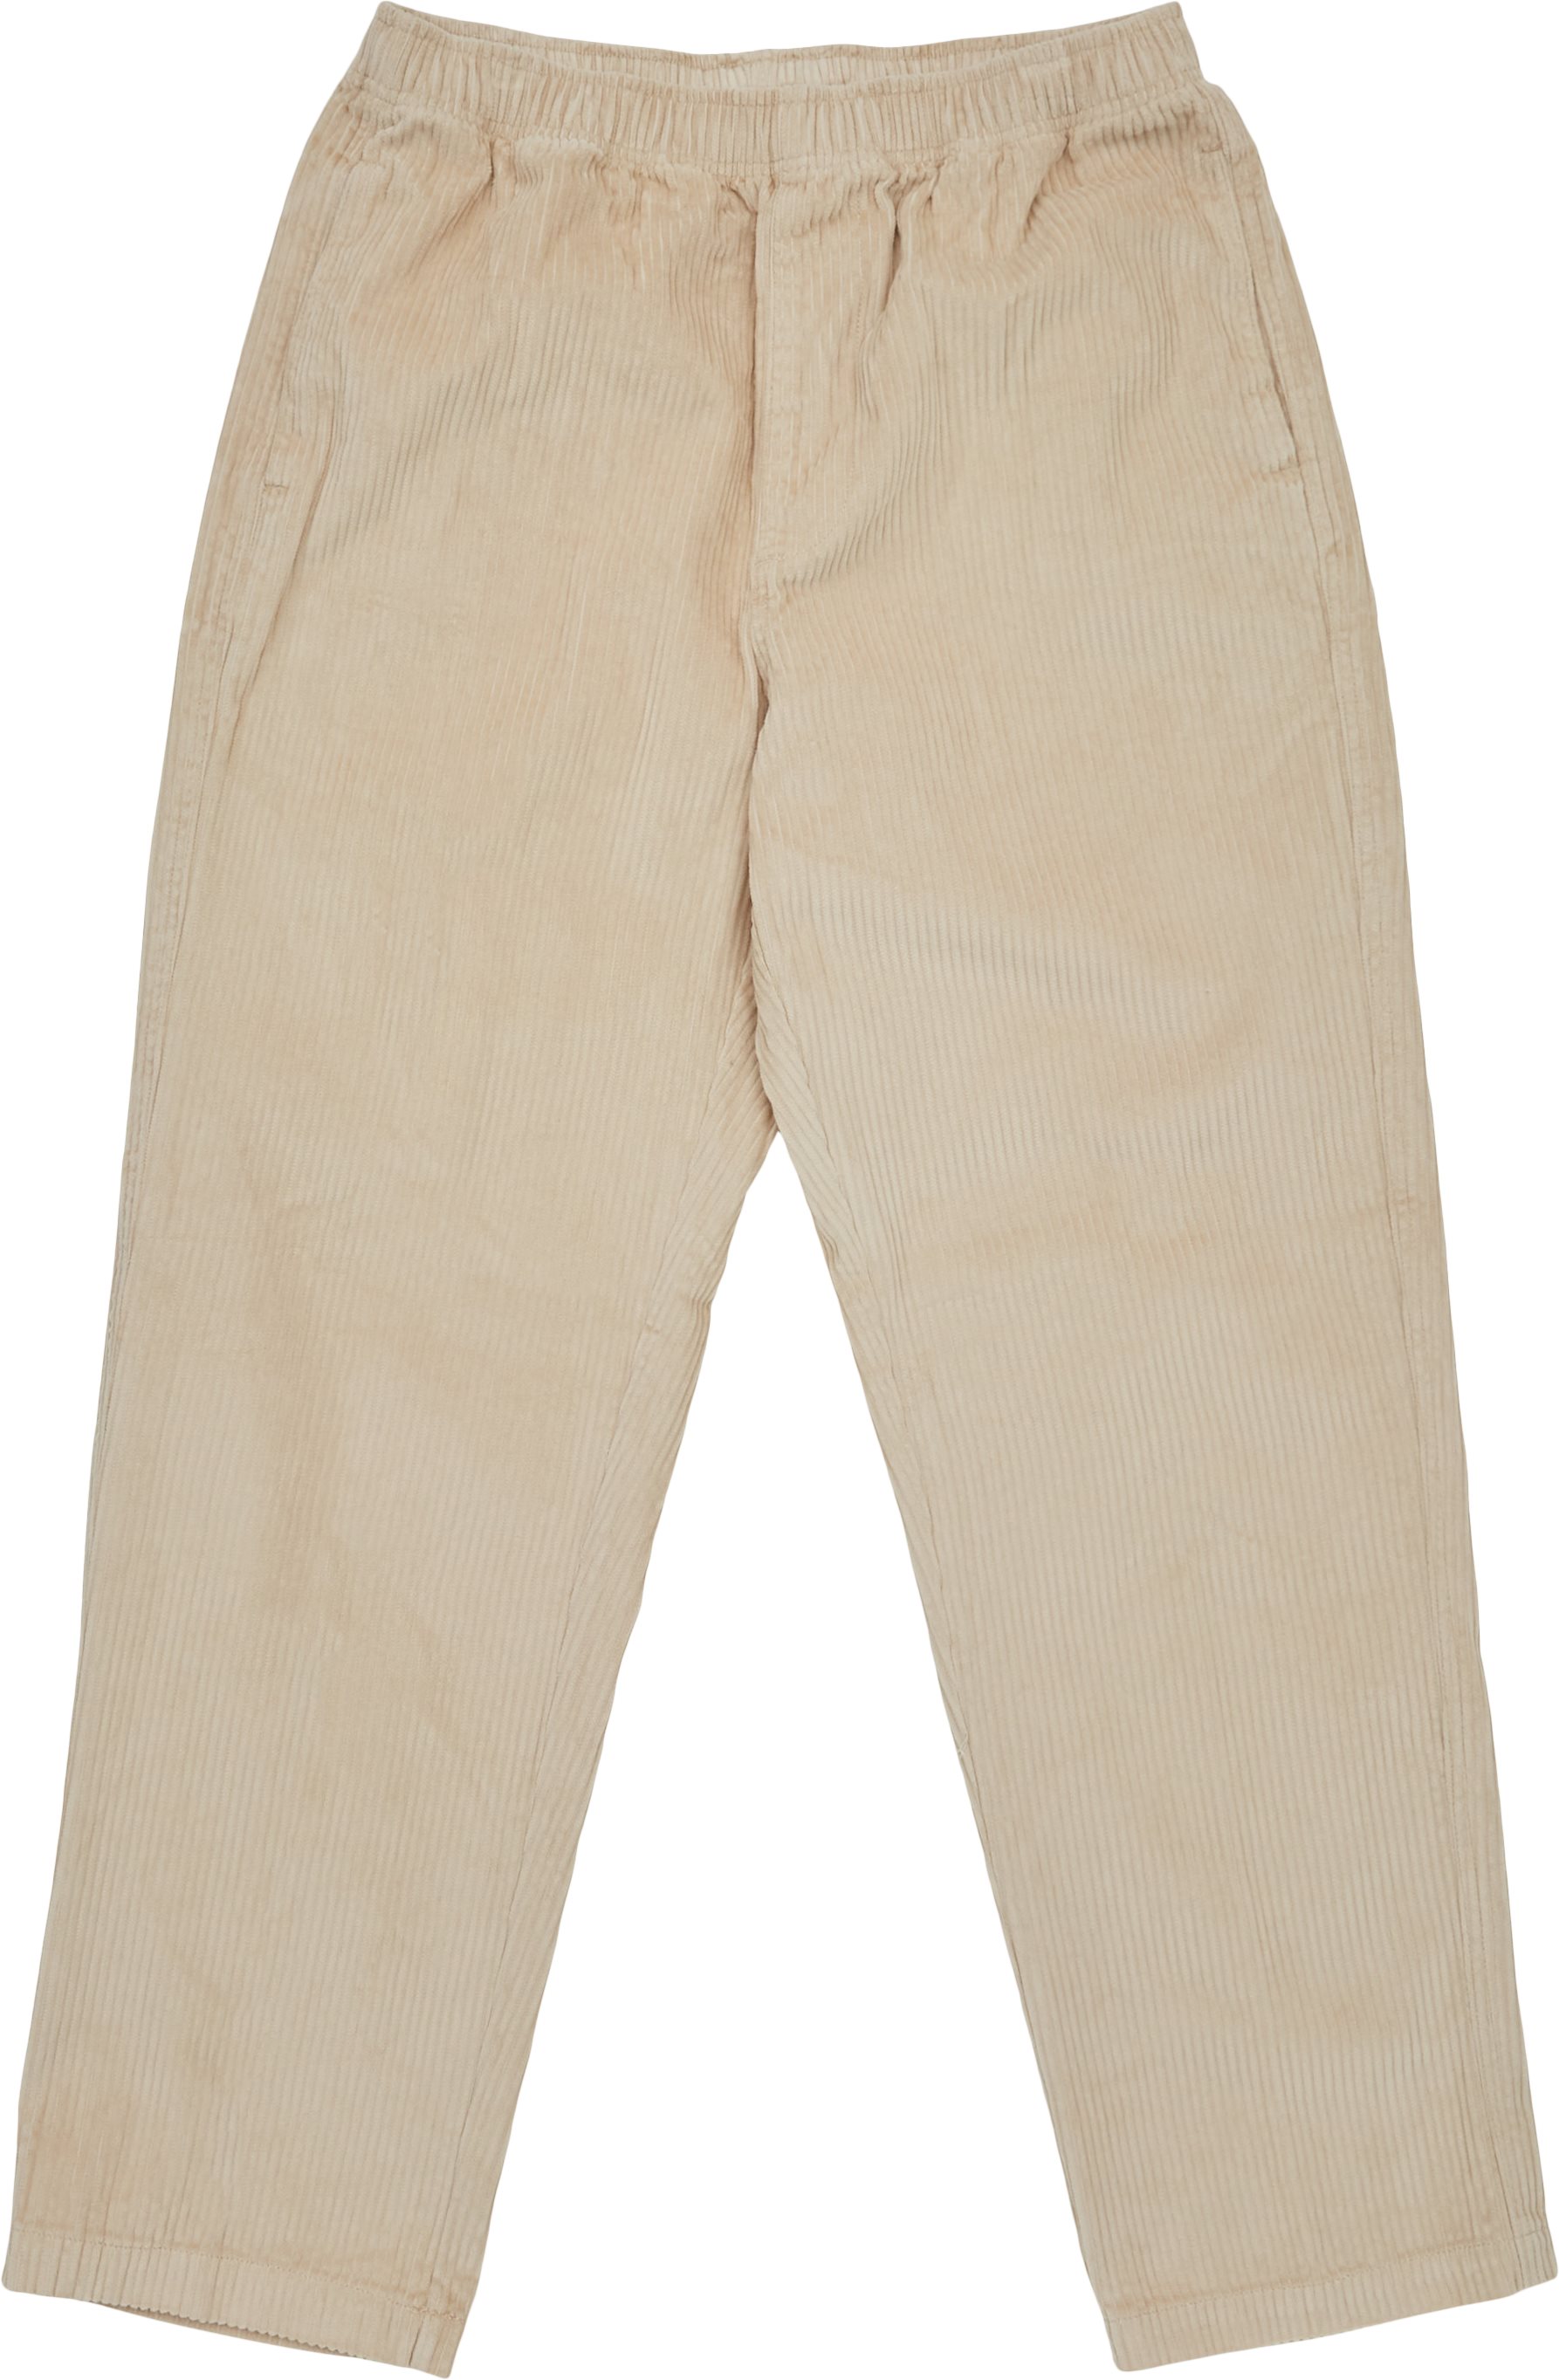 Obey Byxor EASY CORD PANT 142020195 Sand